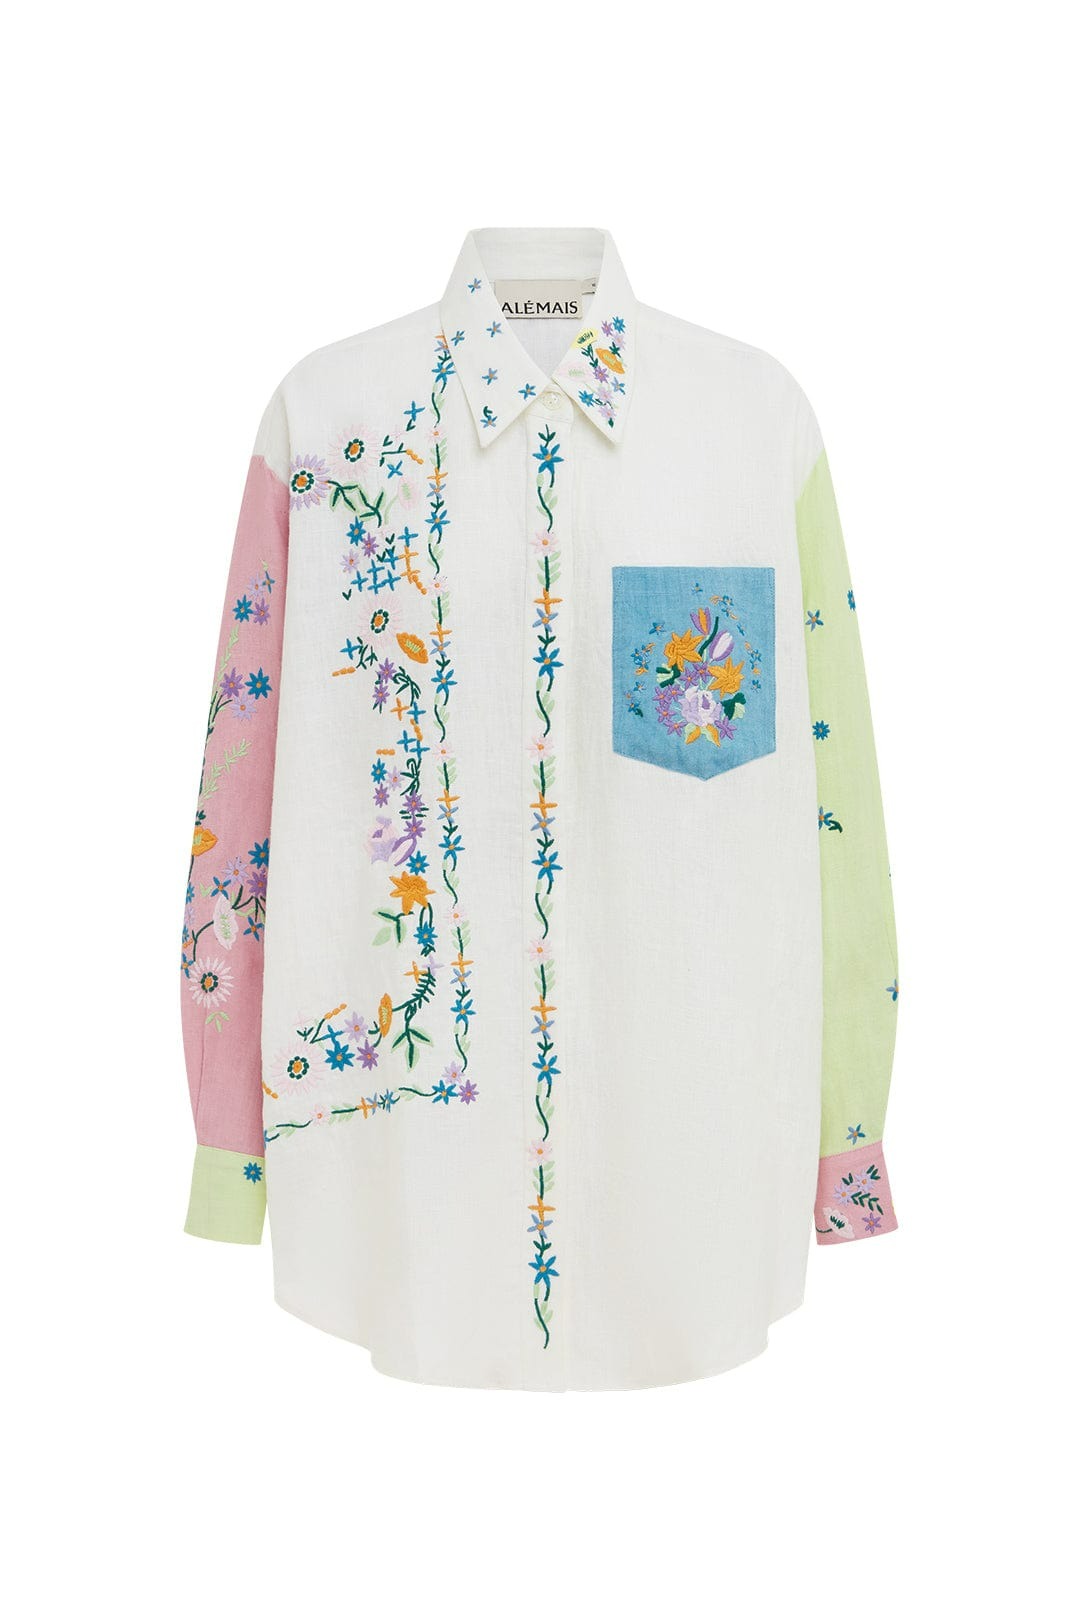 Alemais Willa Embroidered Shirt